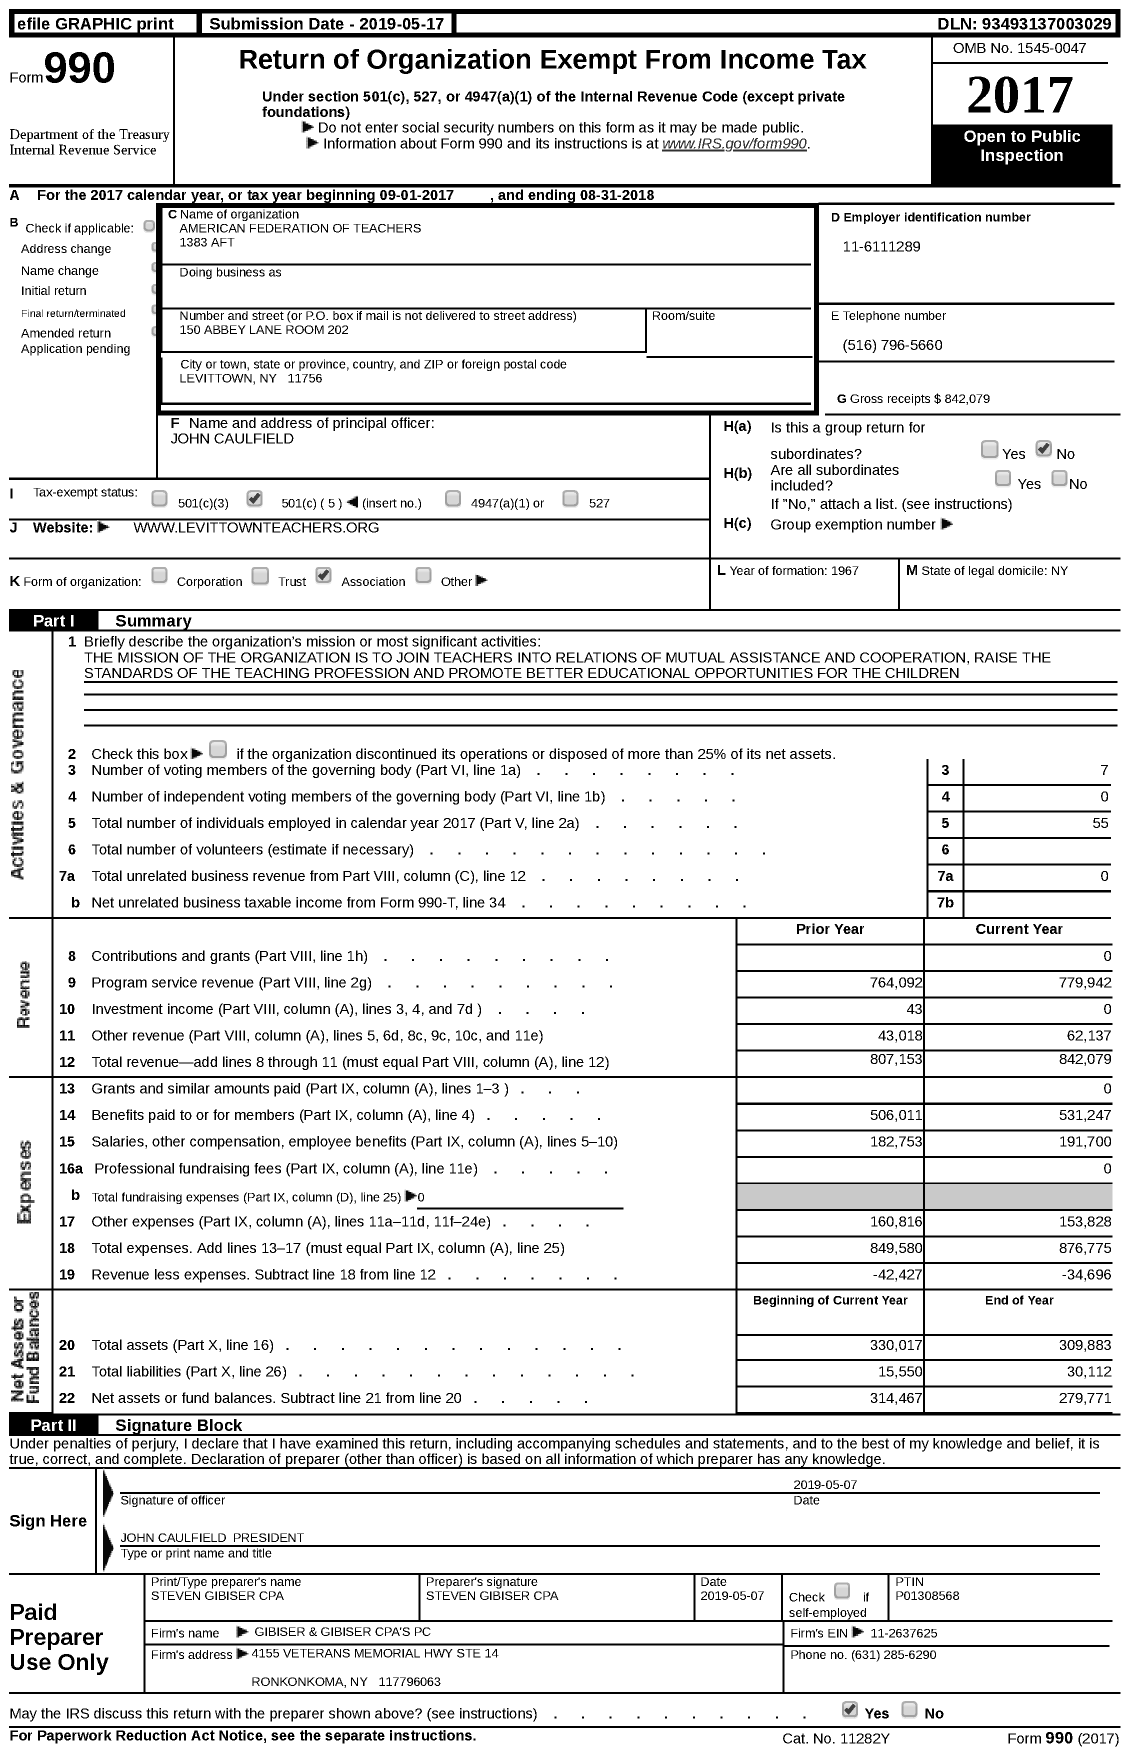 Image of first page of 2017 Form 990 for American Federation of Teachers 1383 (AFT)